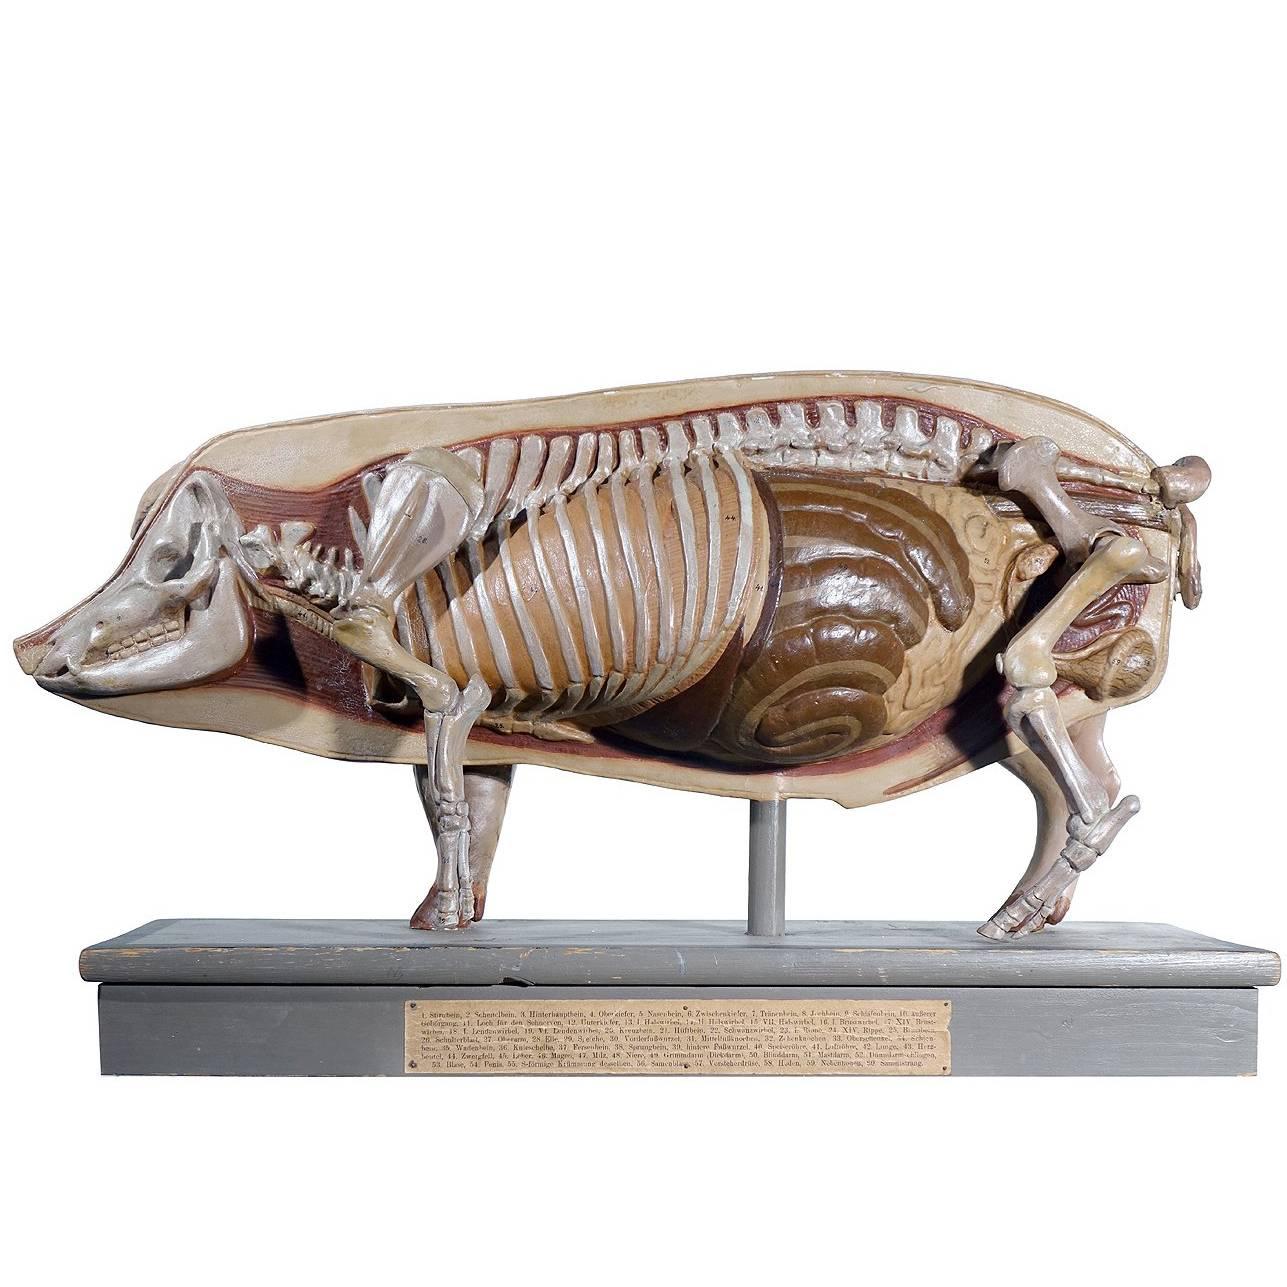 Early Anatomical Model of a Pig